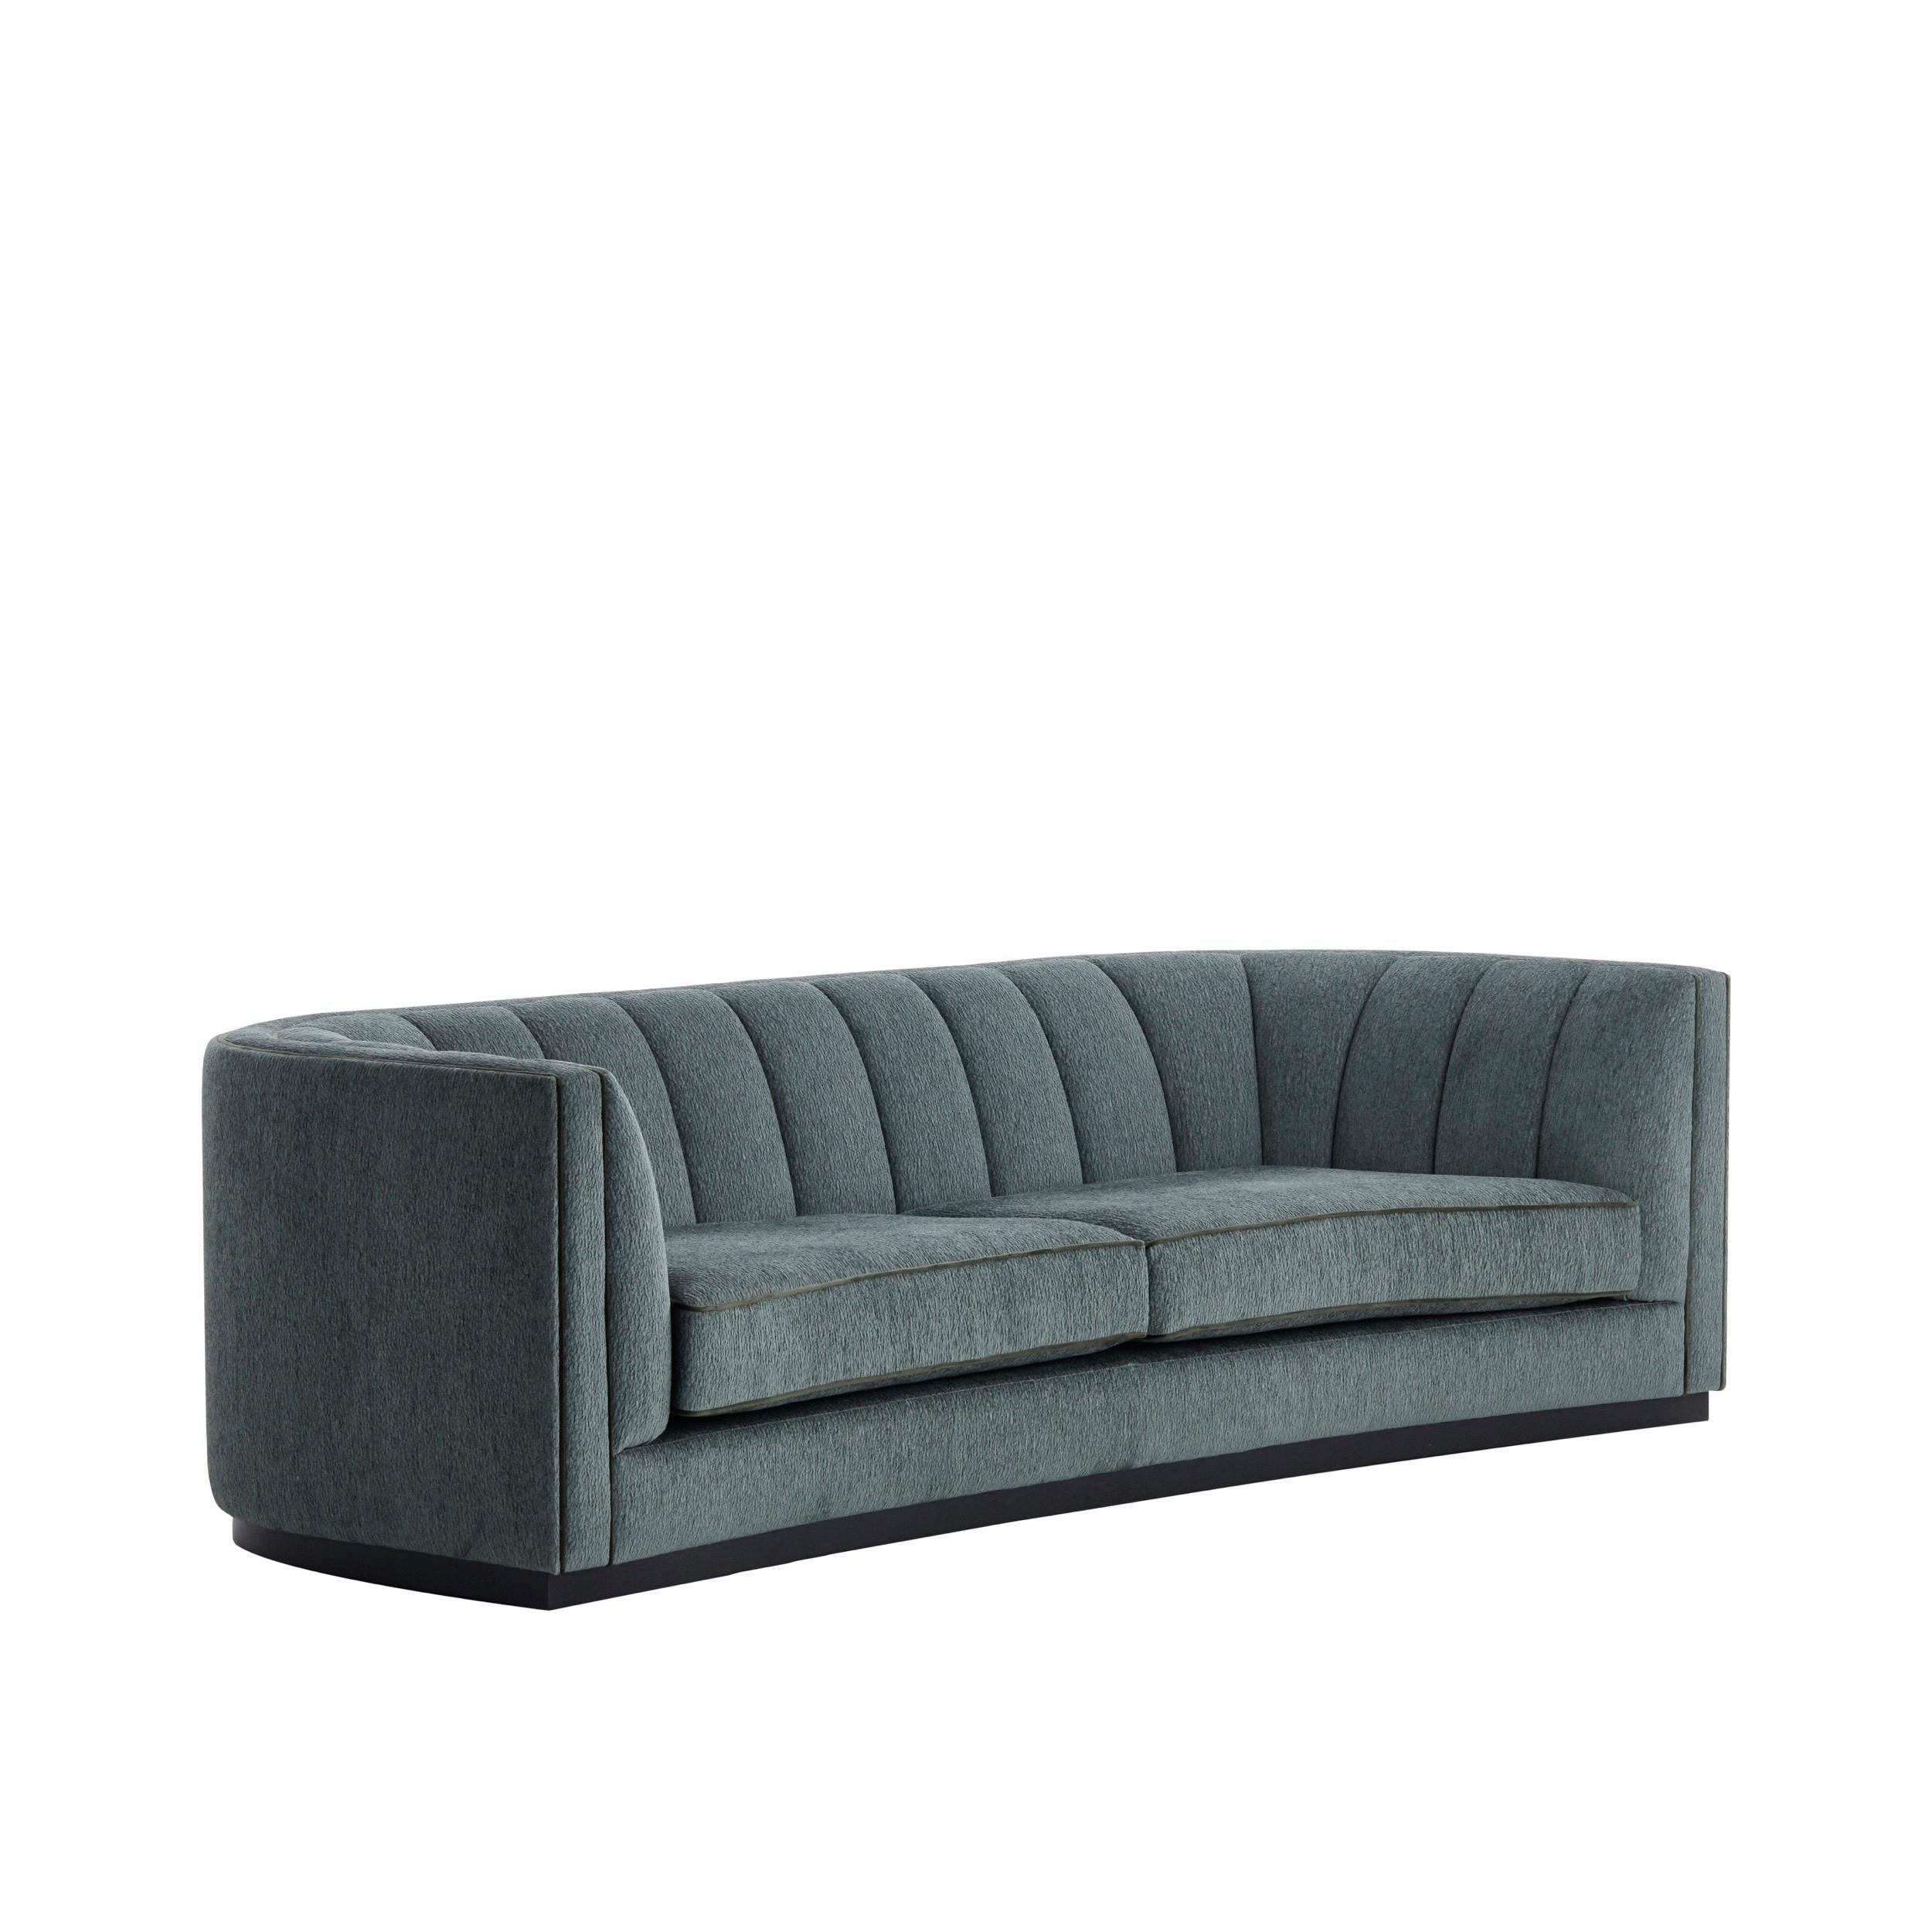 DOURO is a timeless sofa, very comfortable, designed to be used on a daily basis.‎ Characterized by a particular curved shape and a customizable base in wood or lacquered.‎ Available in 2 different sizes or custom dimensions upon request.‎

Custom